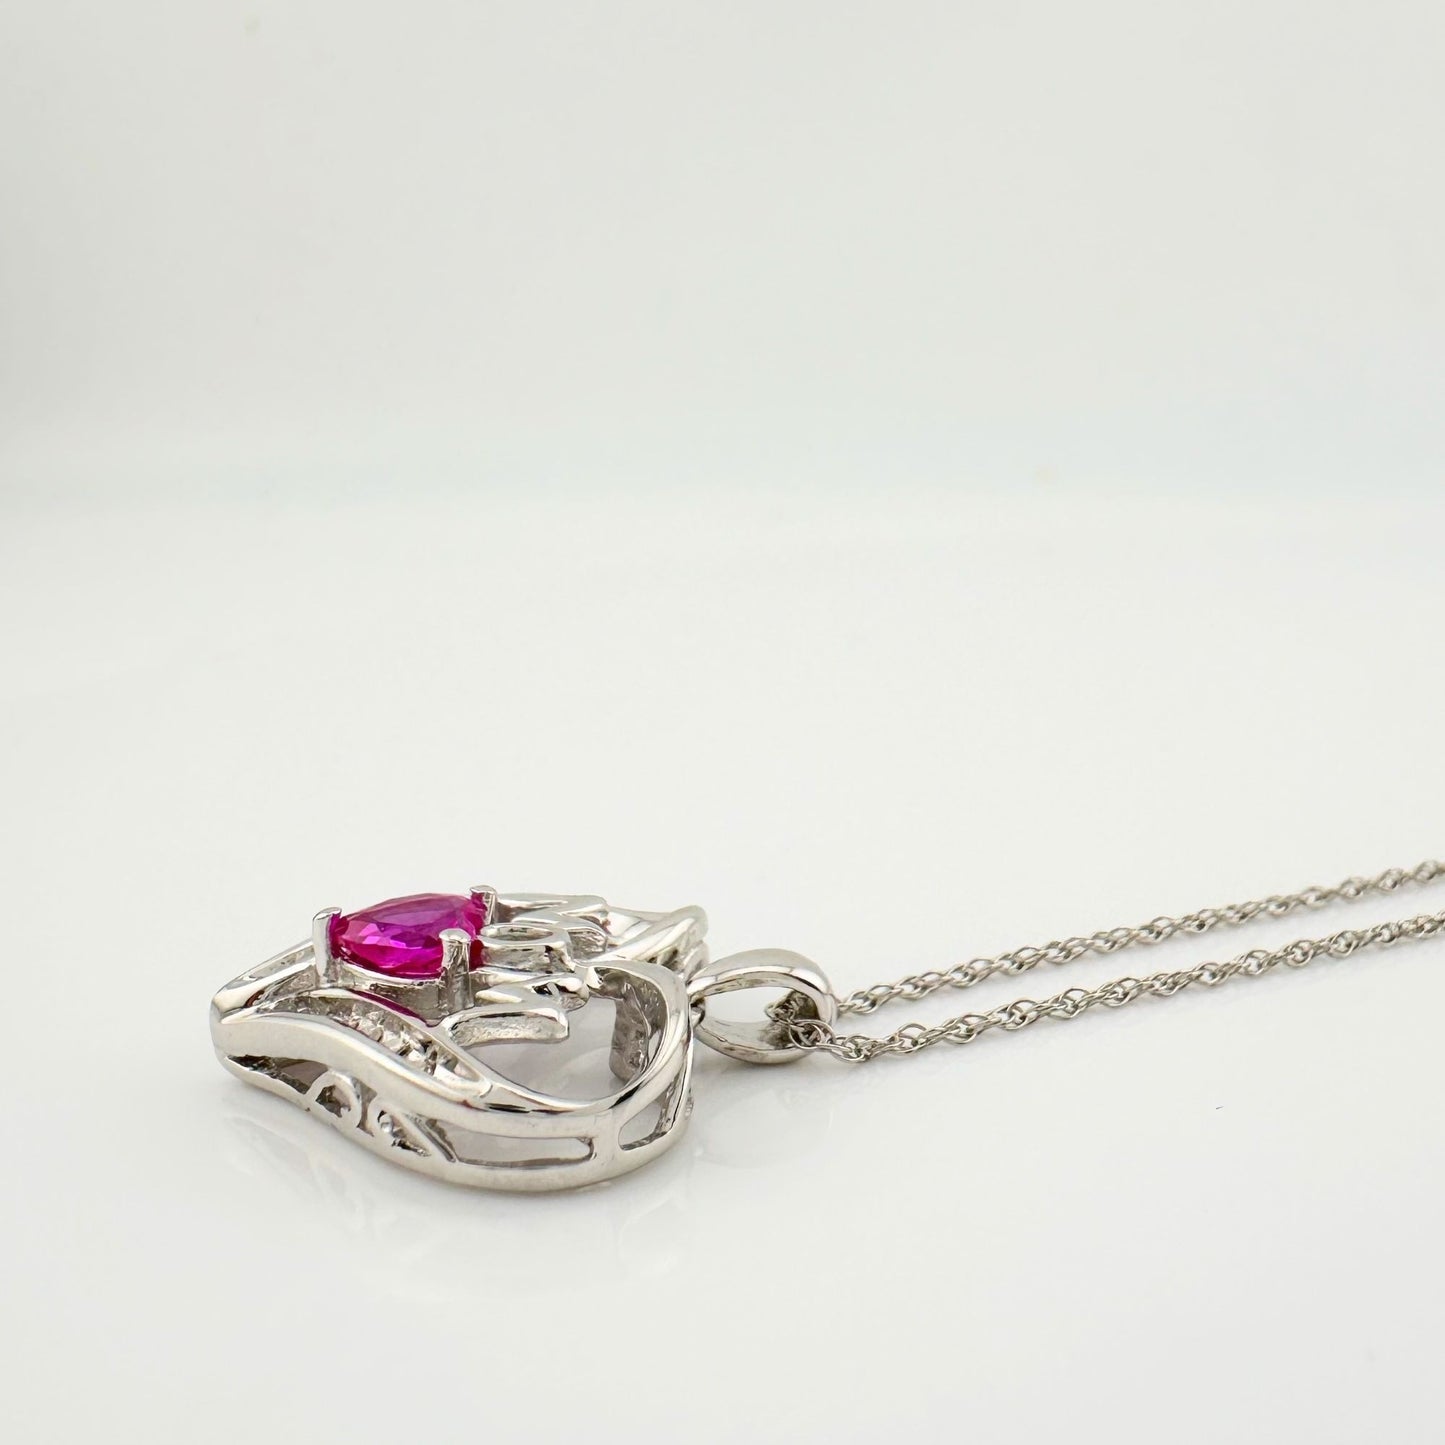 Bright and Beautiful "Mom" Neckace - Heart Shaped Lab Created Pink Sapphire - Sterling